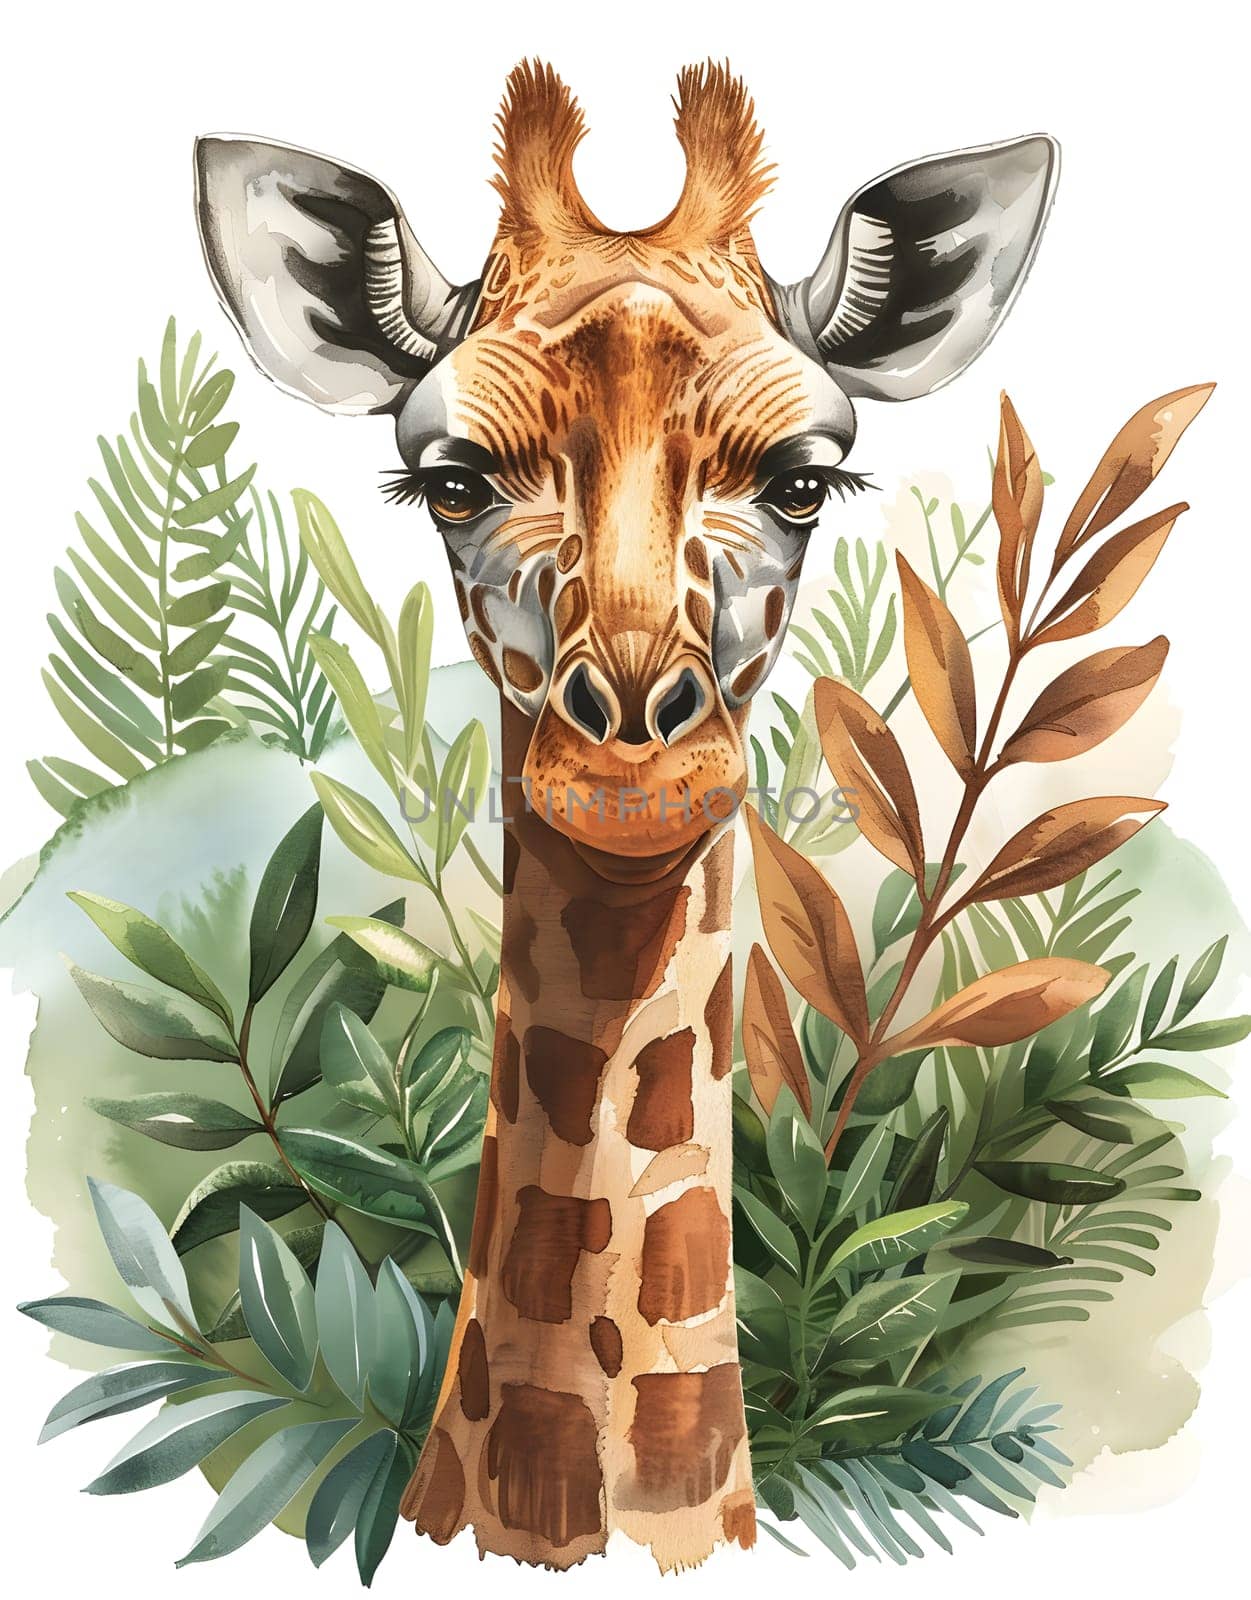 An illustration of a Giraffidae surrounded by Terrestrial plants and grass on a white background. The fawncolored giraffe has a long snout and is beautifully captured in an artistic way